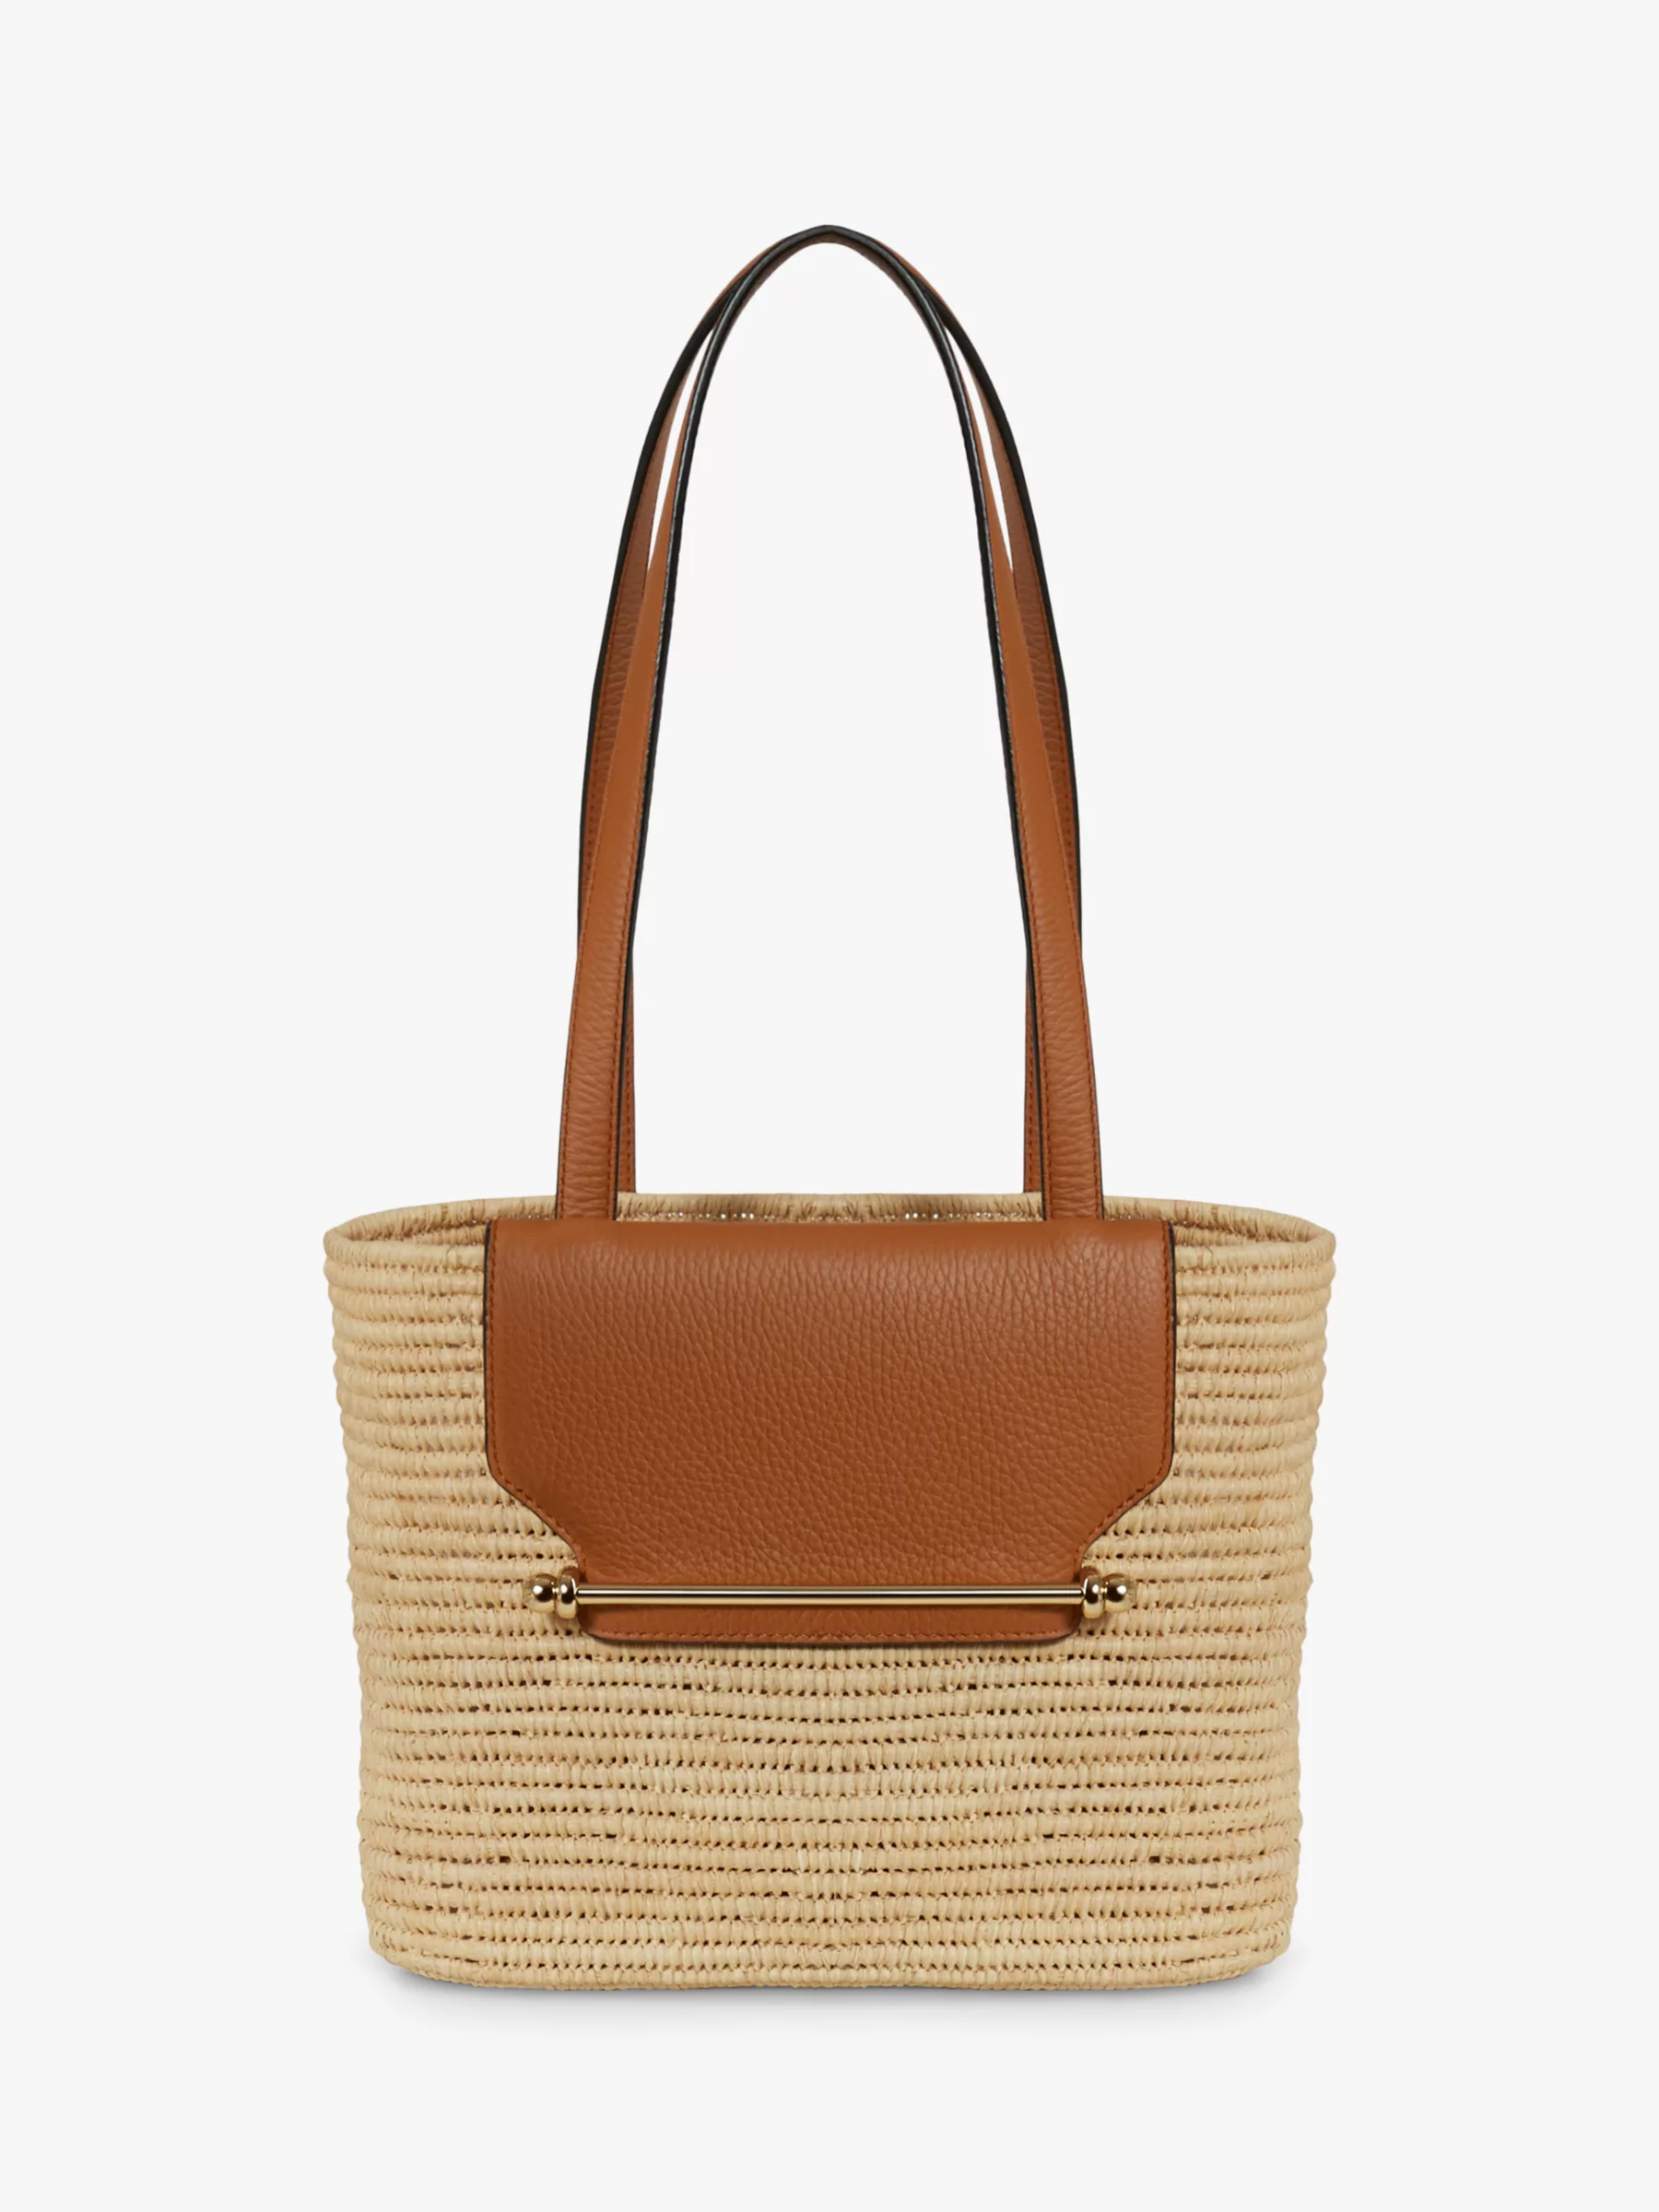 Strathberry the Strathberry Basket Bag, Natural/tan